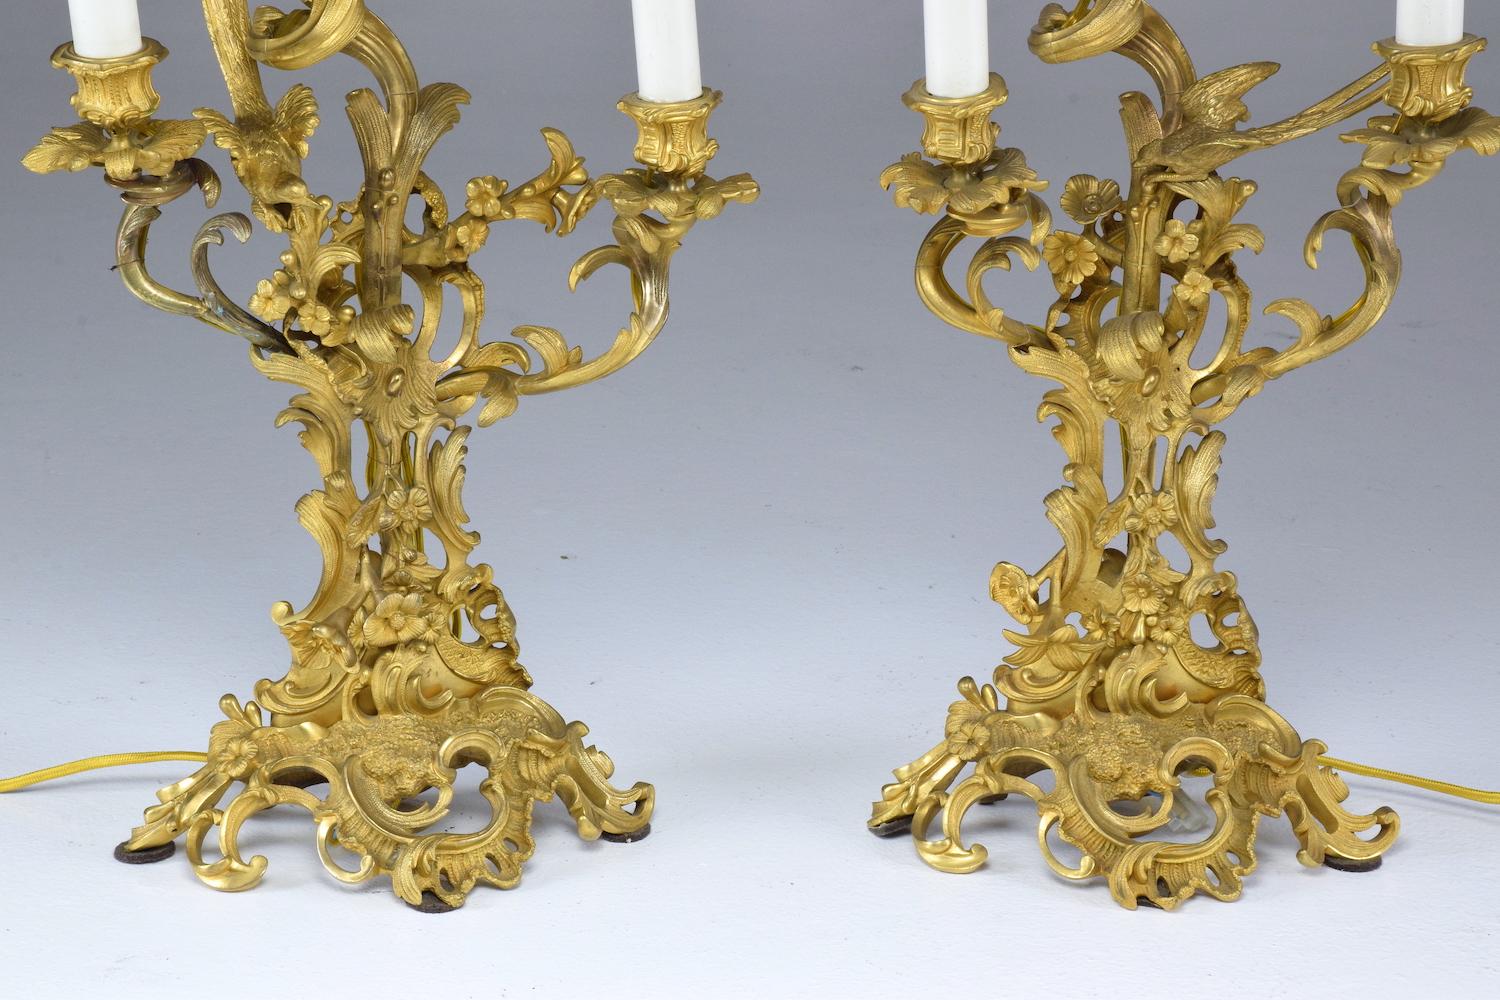  French Pair of Antique Louis VXI Ormolu Electrified Candelabras  3